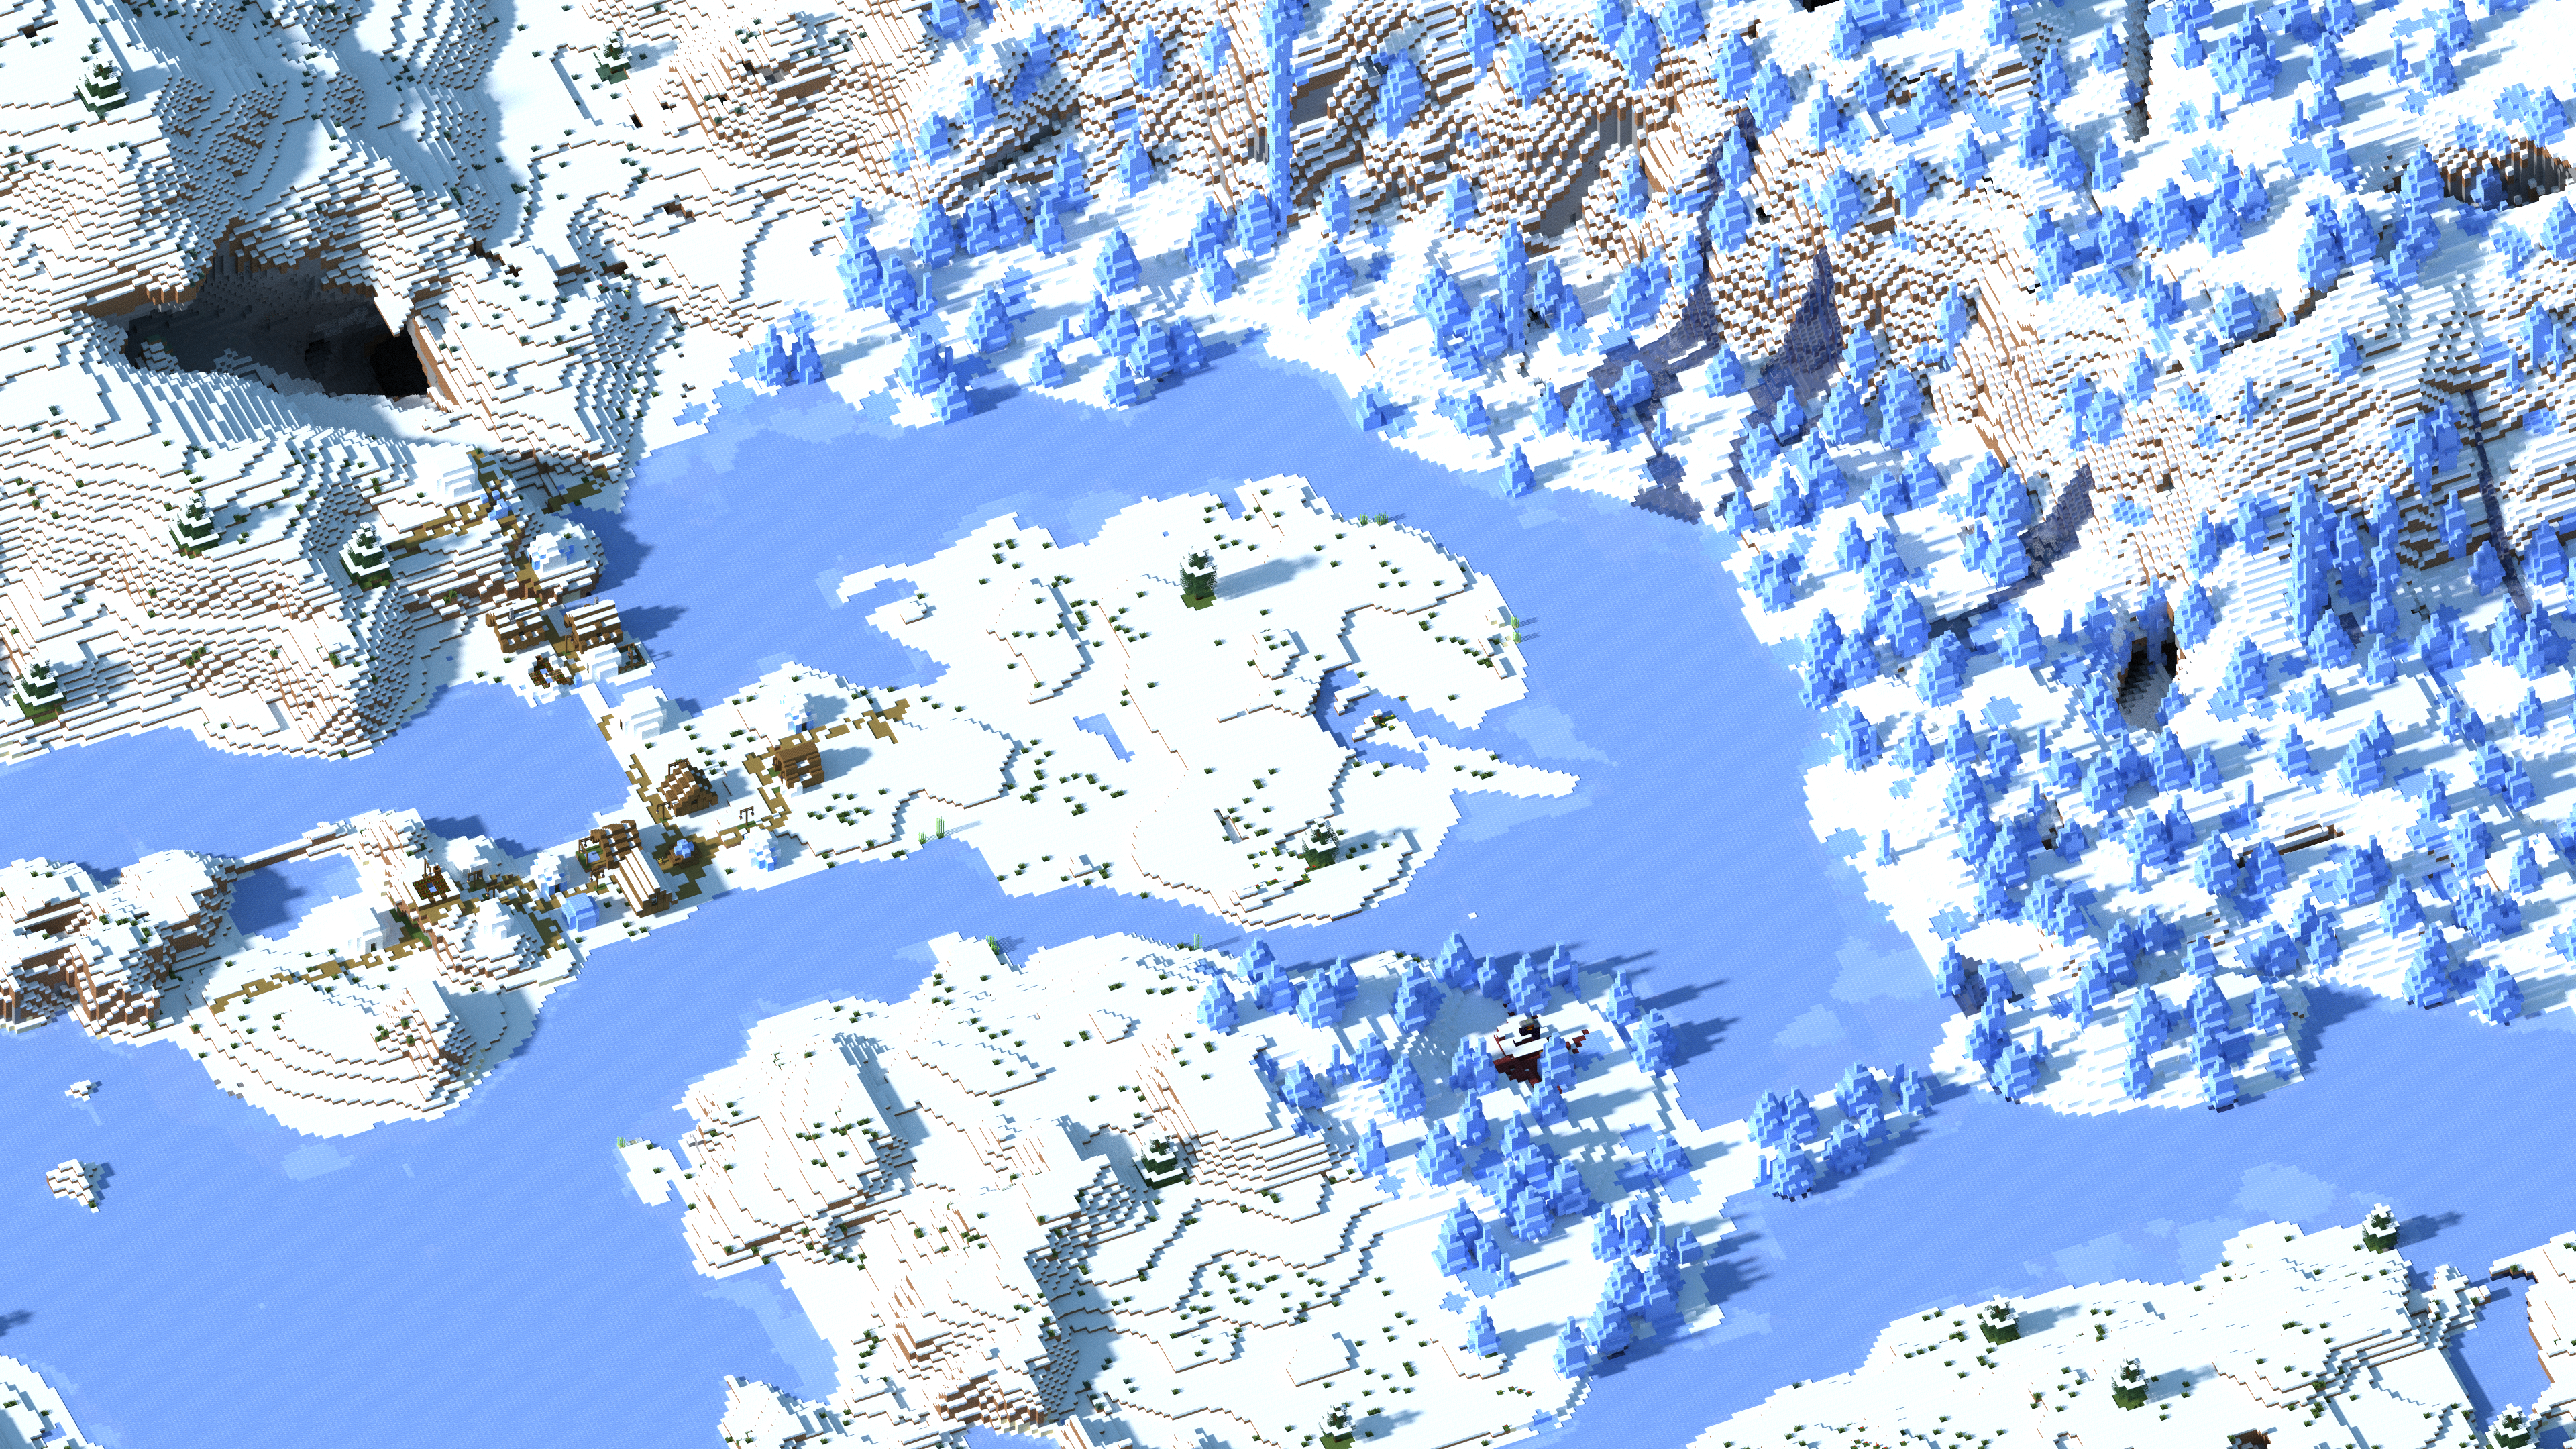 General 3840x2160 Minecraft screen shot mountain view top view snow video games nature